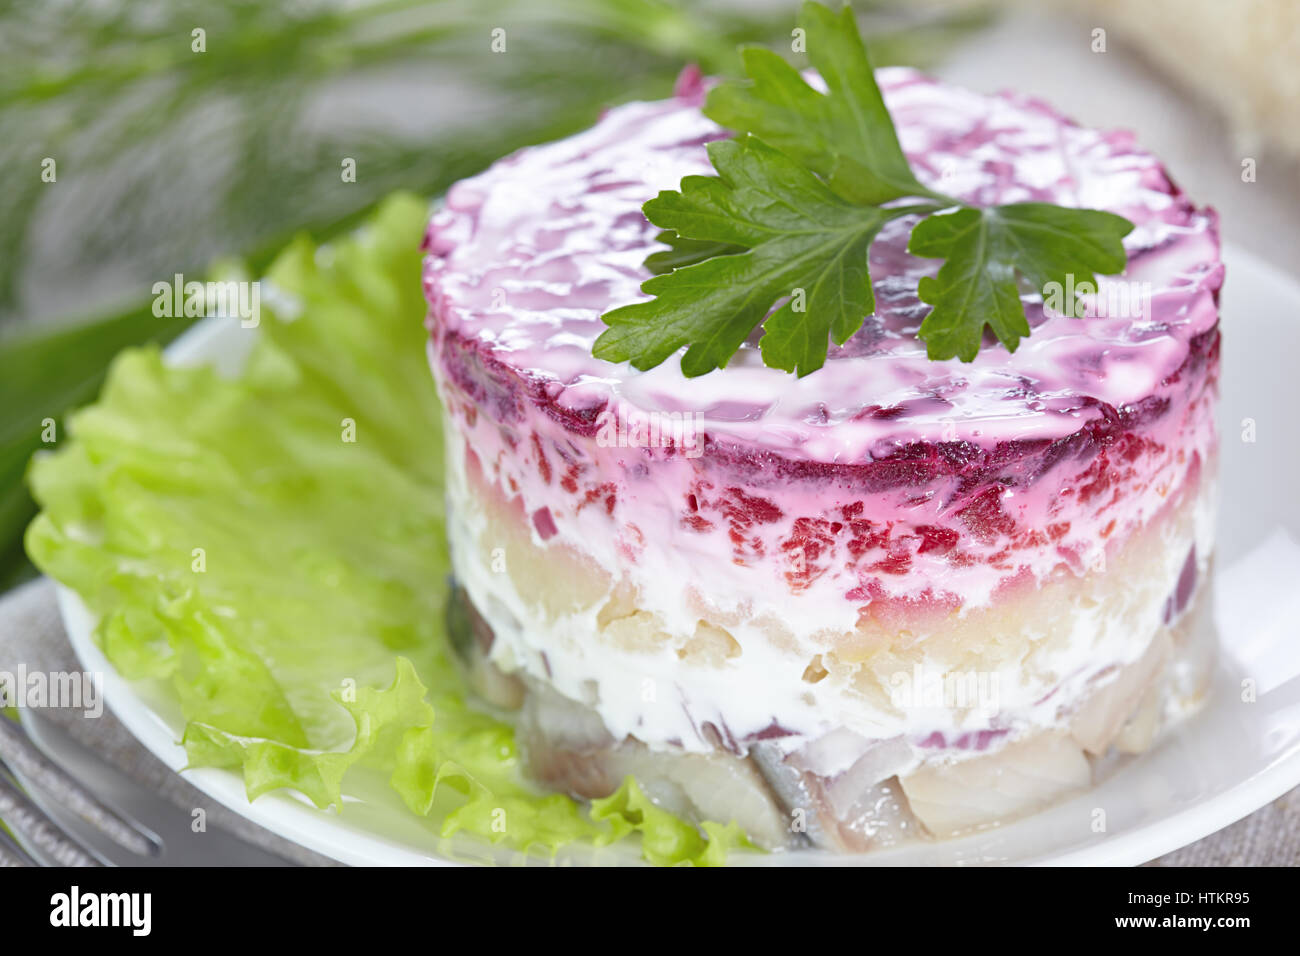 Salad 'Herring under a fur coat'on a white plate Stock Photo